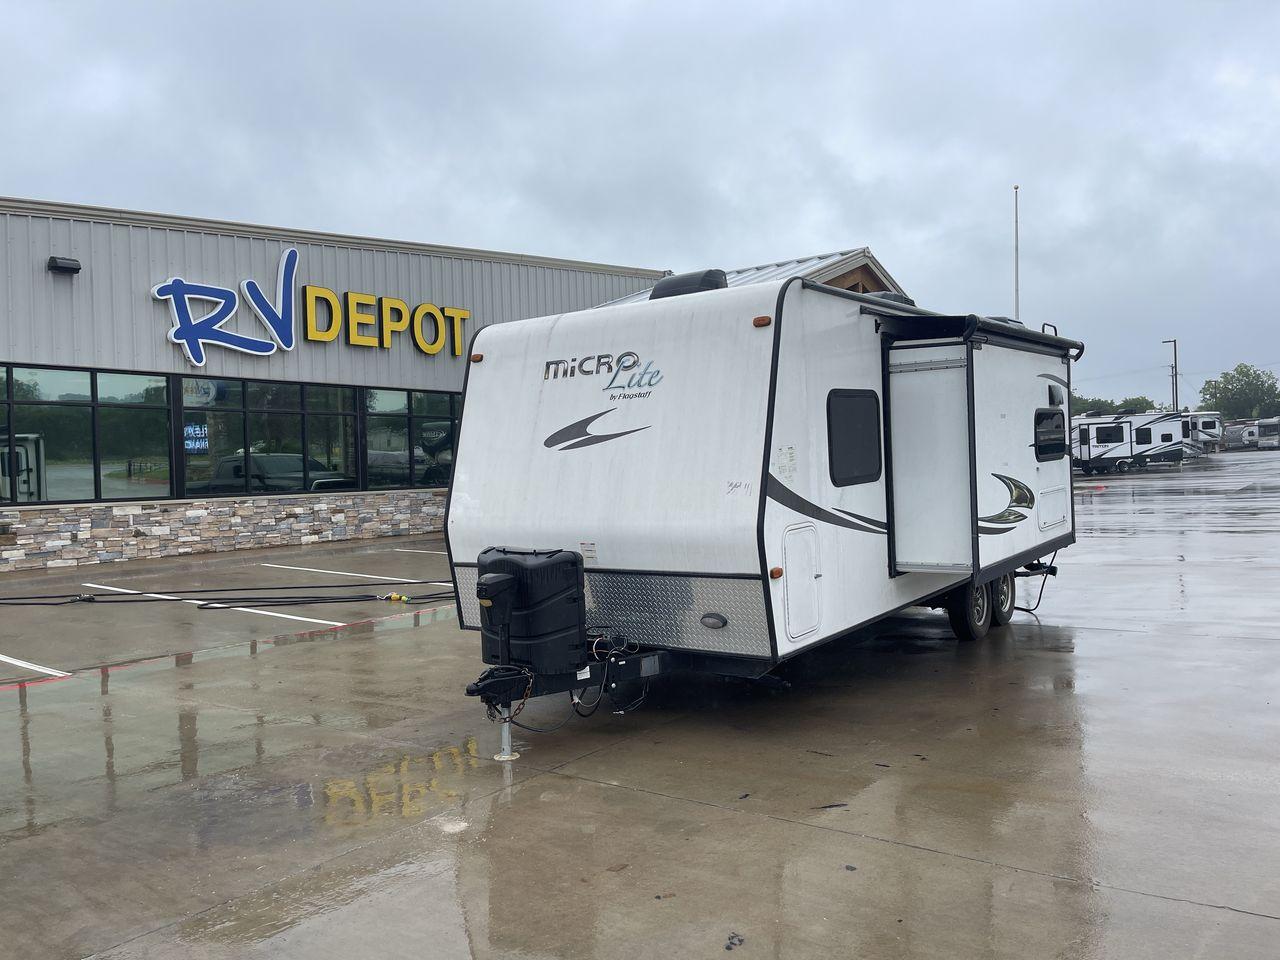 2015 FOREST RIVER FLAGSTAFF 25KS (4X4TFLA23FD) , Length: 25.67 ft. | Dry Weight: 4,310 lbs. | Gross Weight: 6,538 lbs. | Slides: 1 transmission, located at 4319 N Main Street, Cleburne, TX, 76033, (817) 221-0660, 32.435829, -97.384178 - The 2015 Forest River Flagstaff 25KS is a dual-axle steel wheel set-up measuring 25.67 ft. in length. It has a dry weight of 4,310 lbs. and a GVWR of 6,538 lbs. It has 1 power slide. Its exterior comes with a power awning with LED lights underneath to light up your campsite, plus a couple of spea - Photo #0